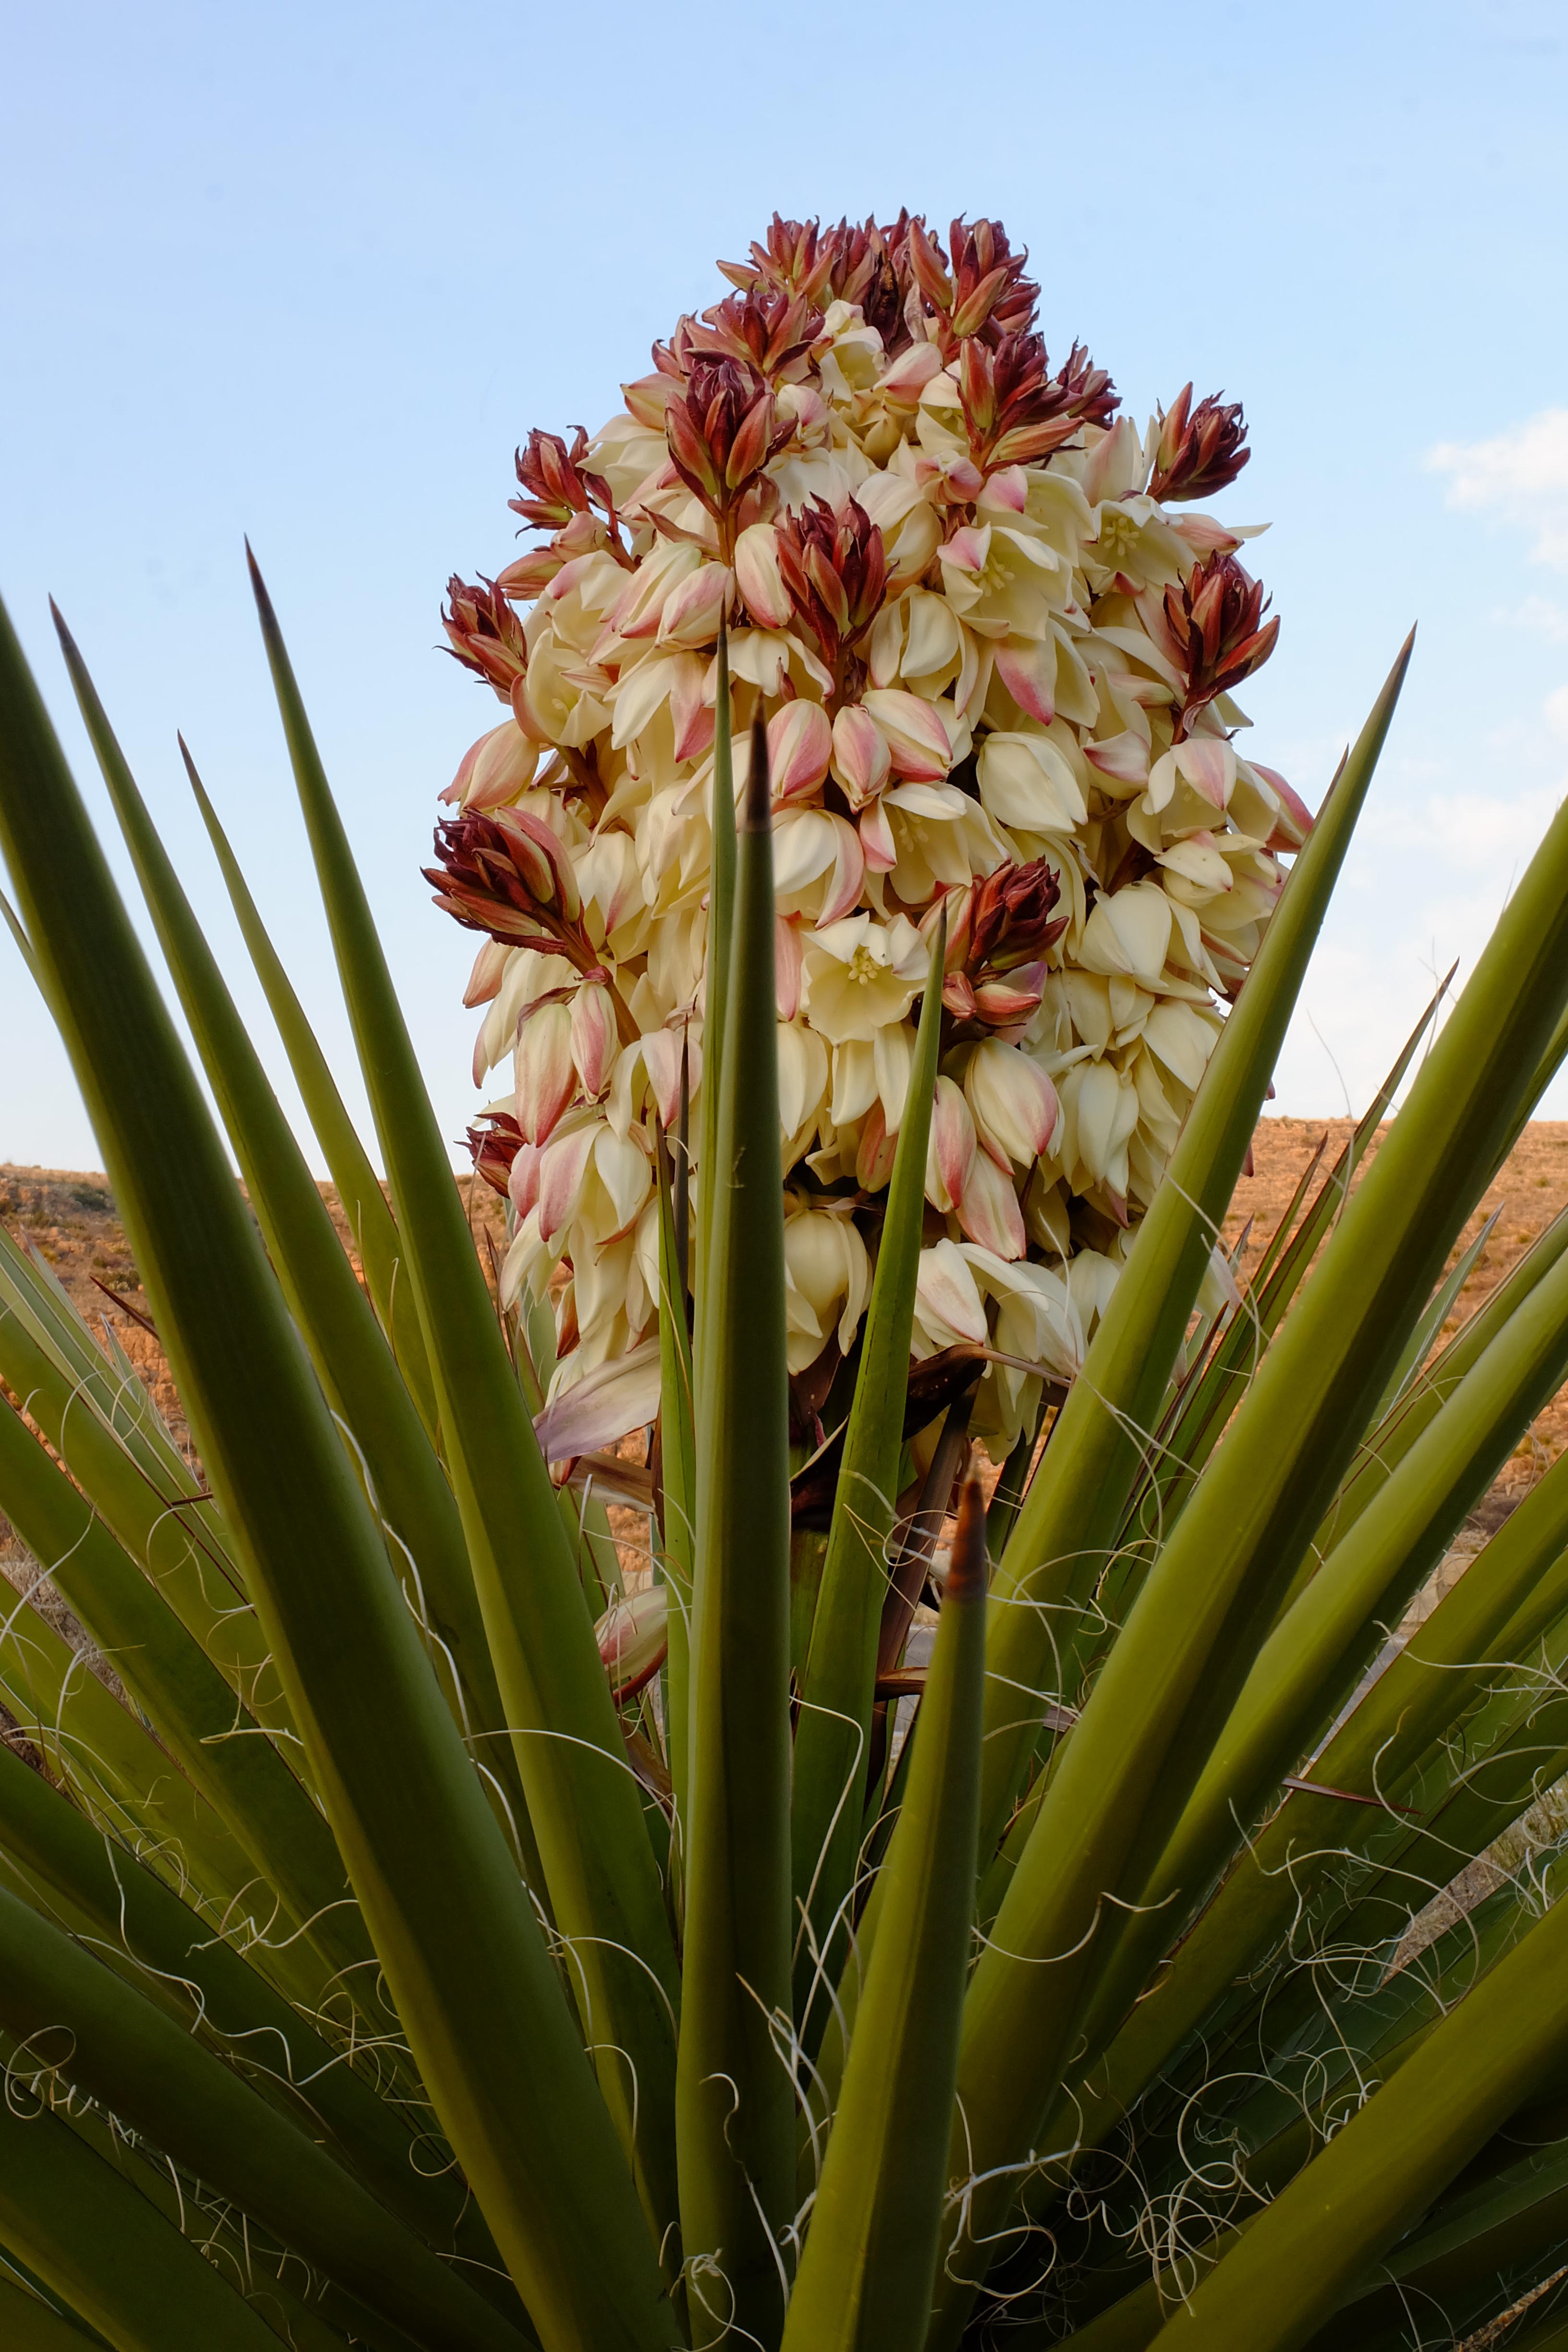 Photo of a yucca plant with cream and pinkish-colored flowers.